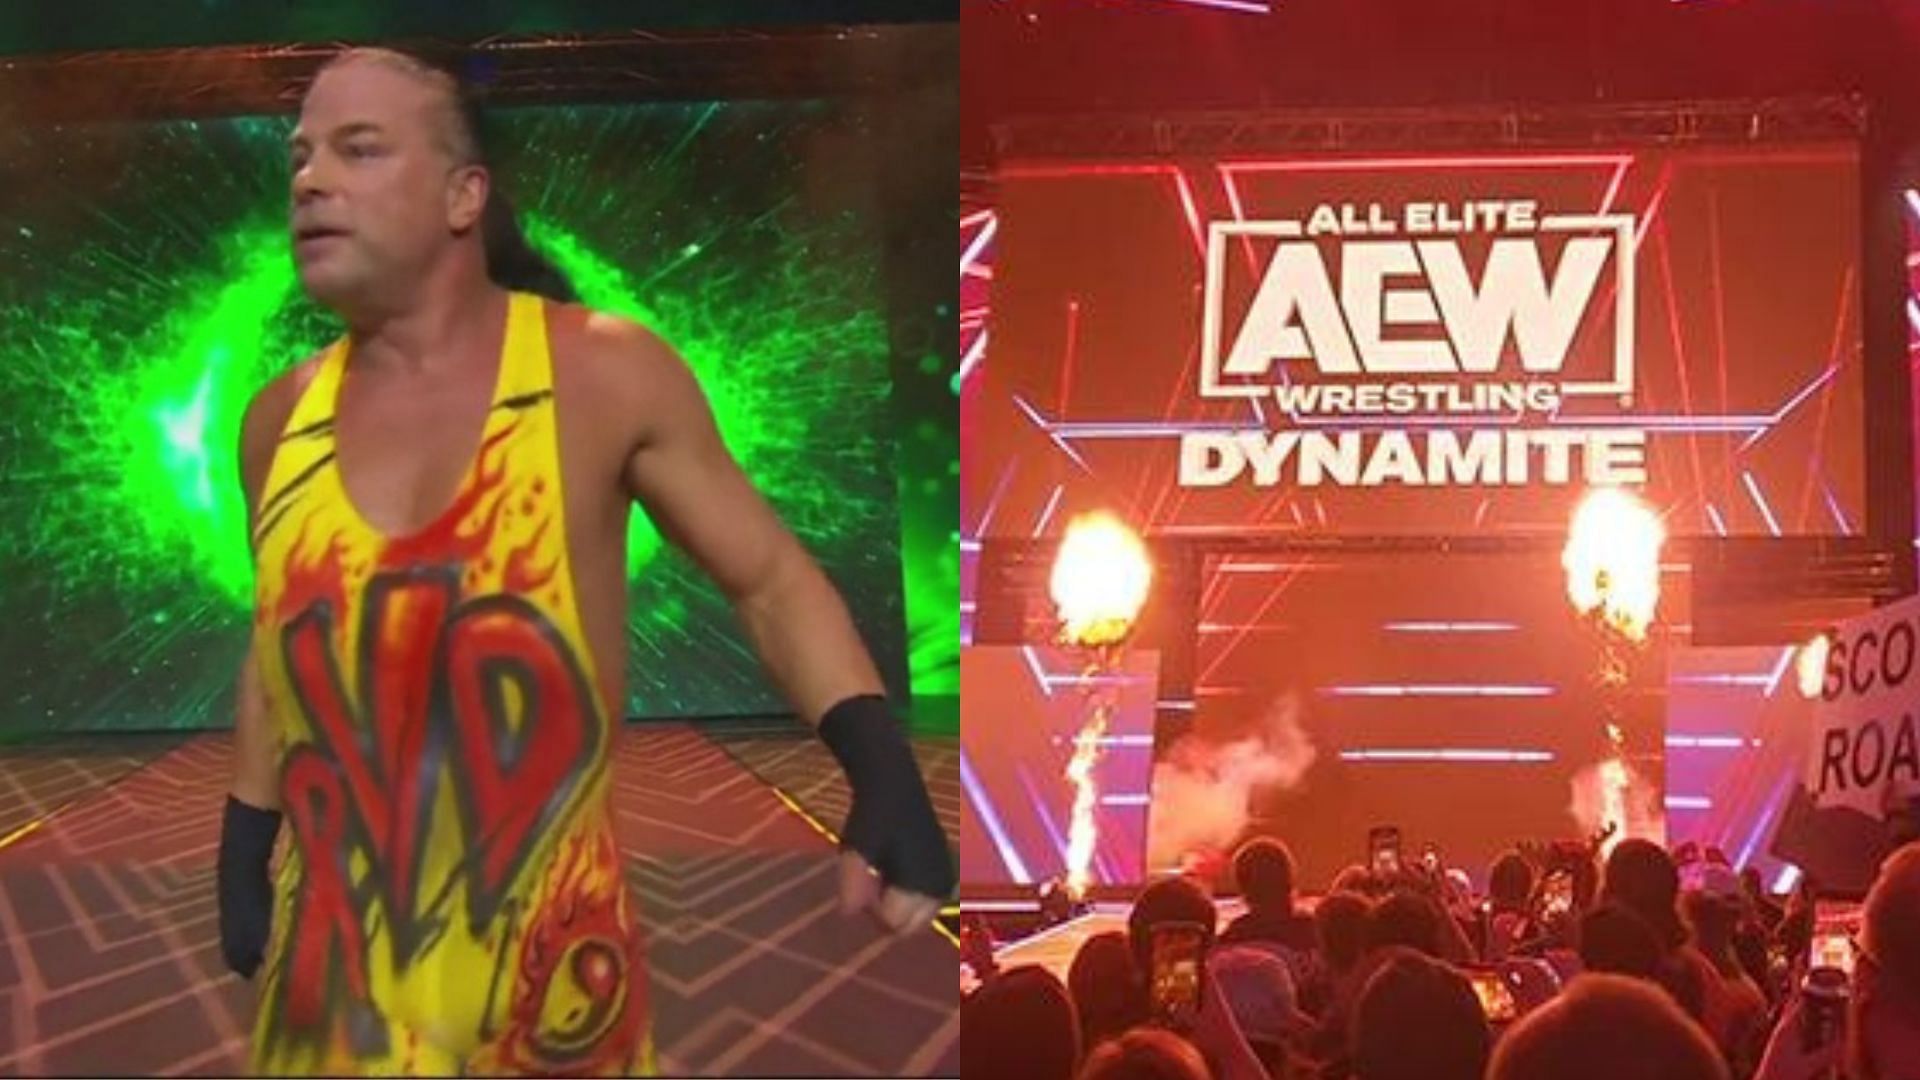 RVD has broken his silence after losing on AEW Dynamite